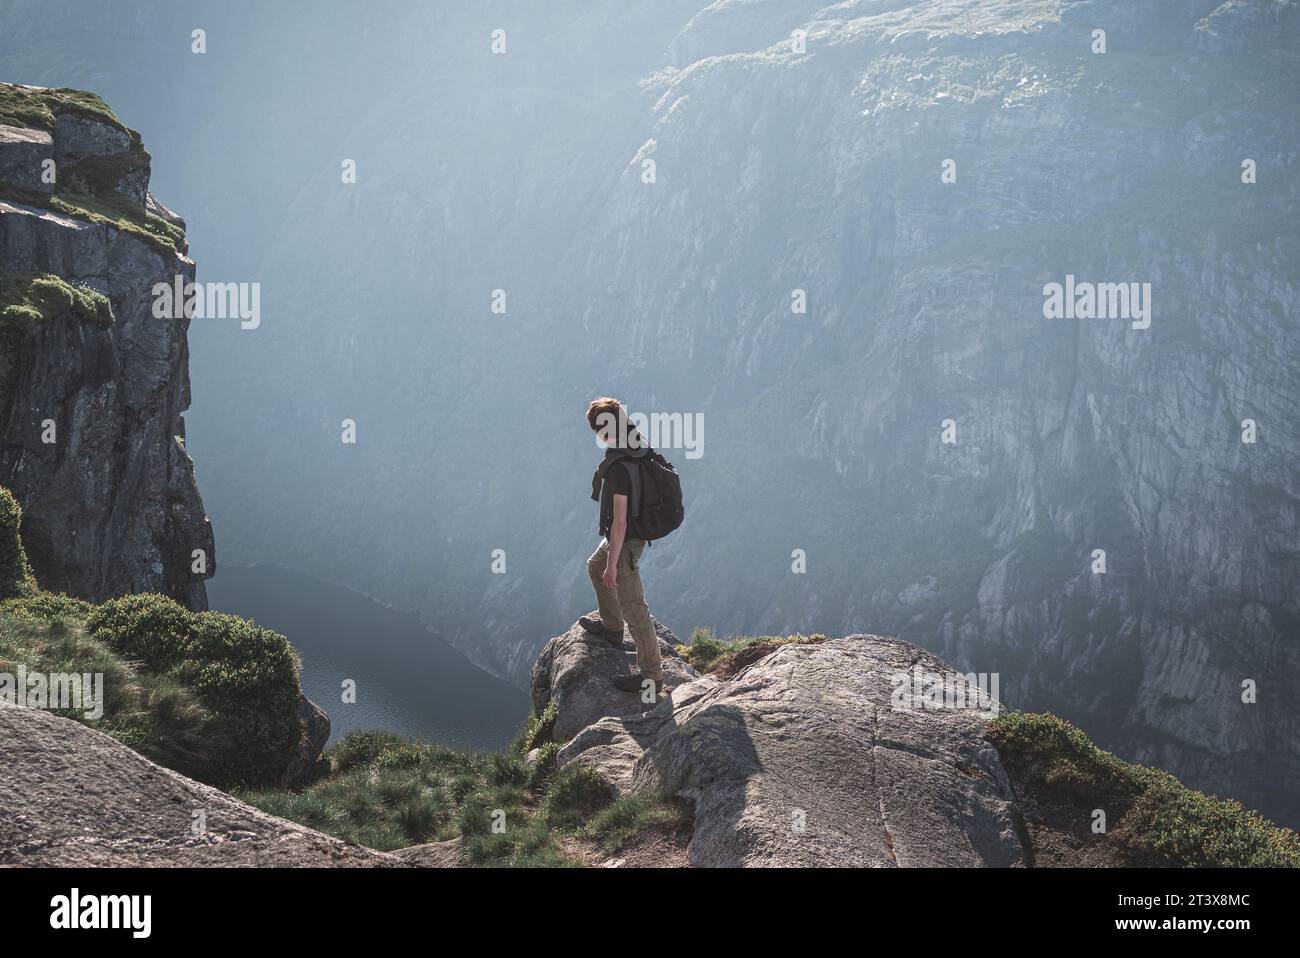 Hiker standing on the edge of a cliff and enjoying the view Stock Photo